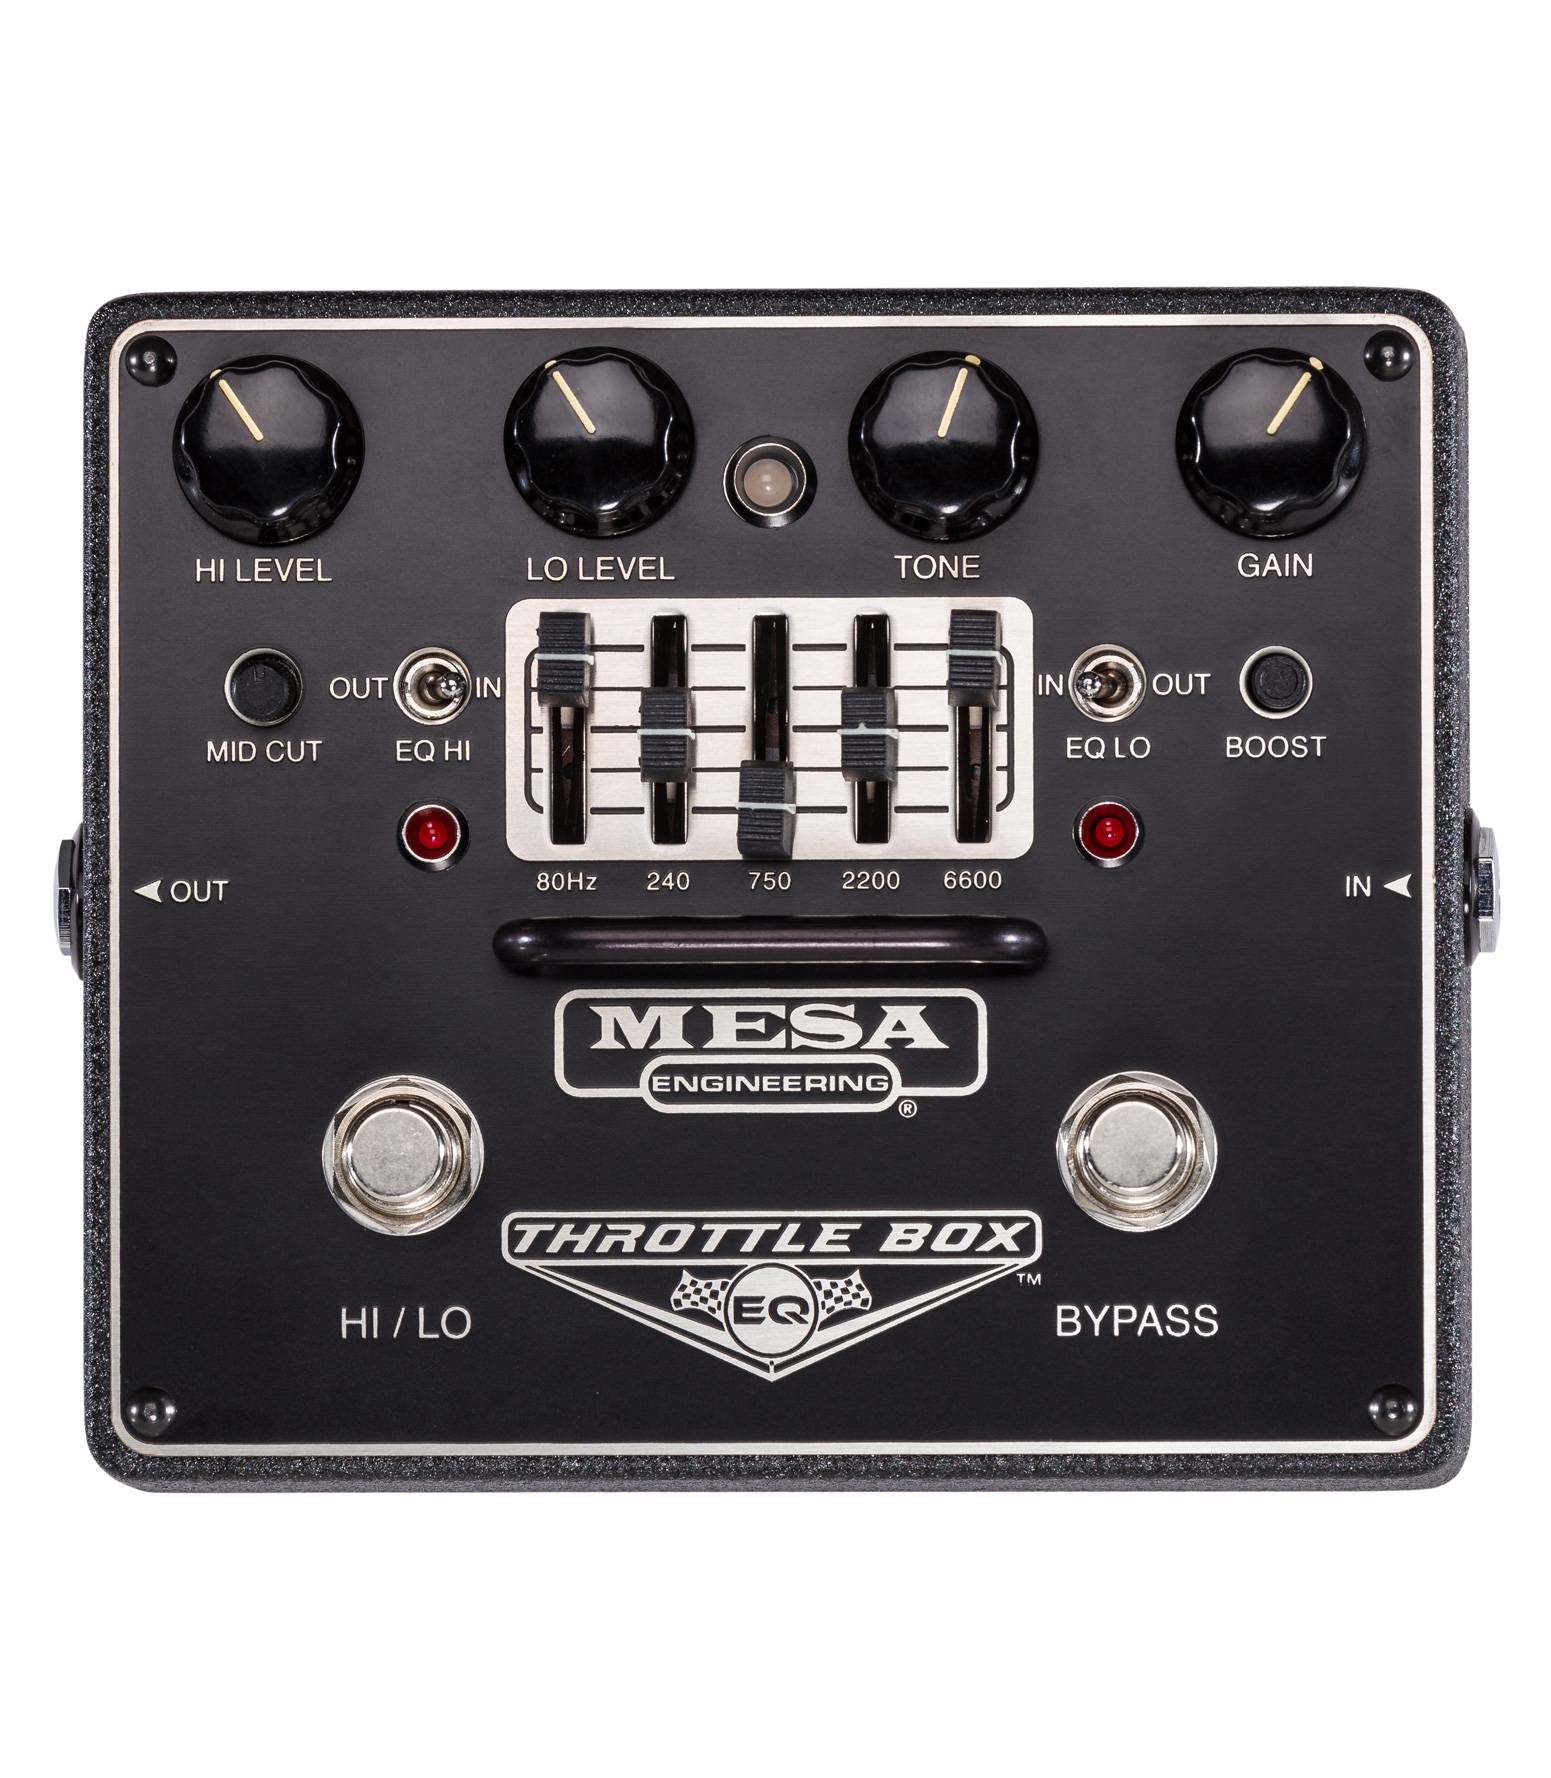 buy mesaboogie throttle box eq 5 band graphic pedal